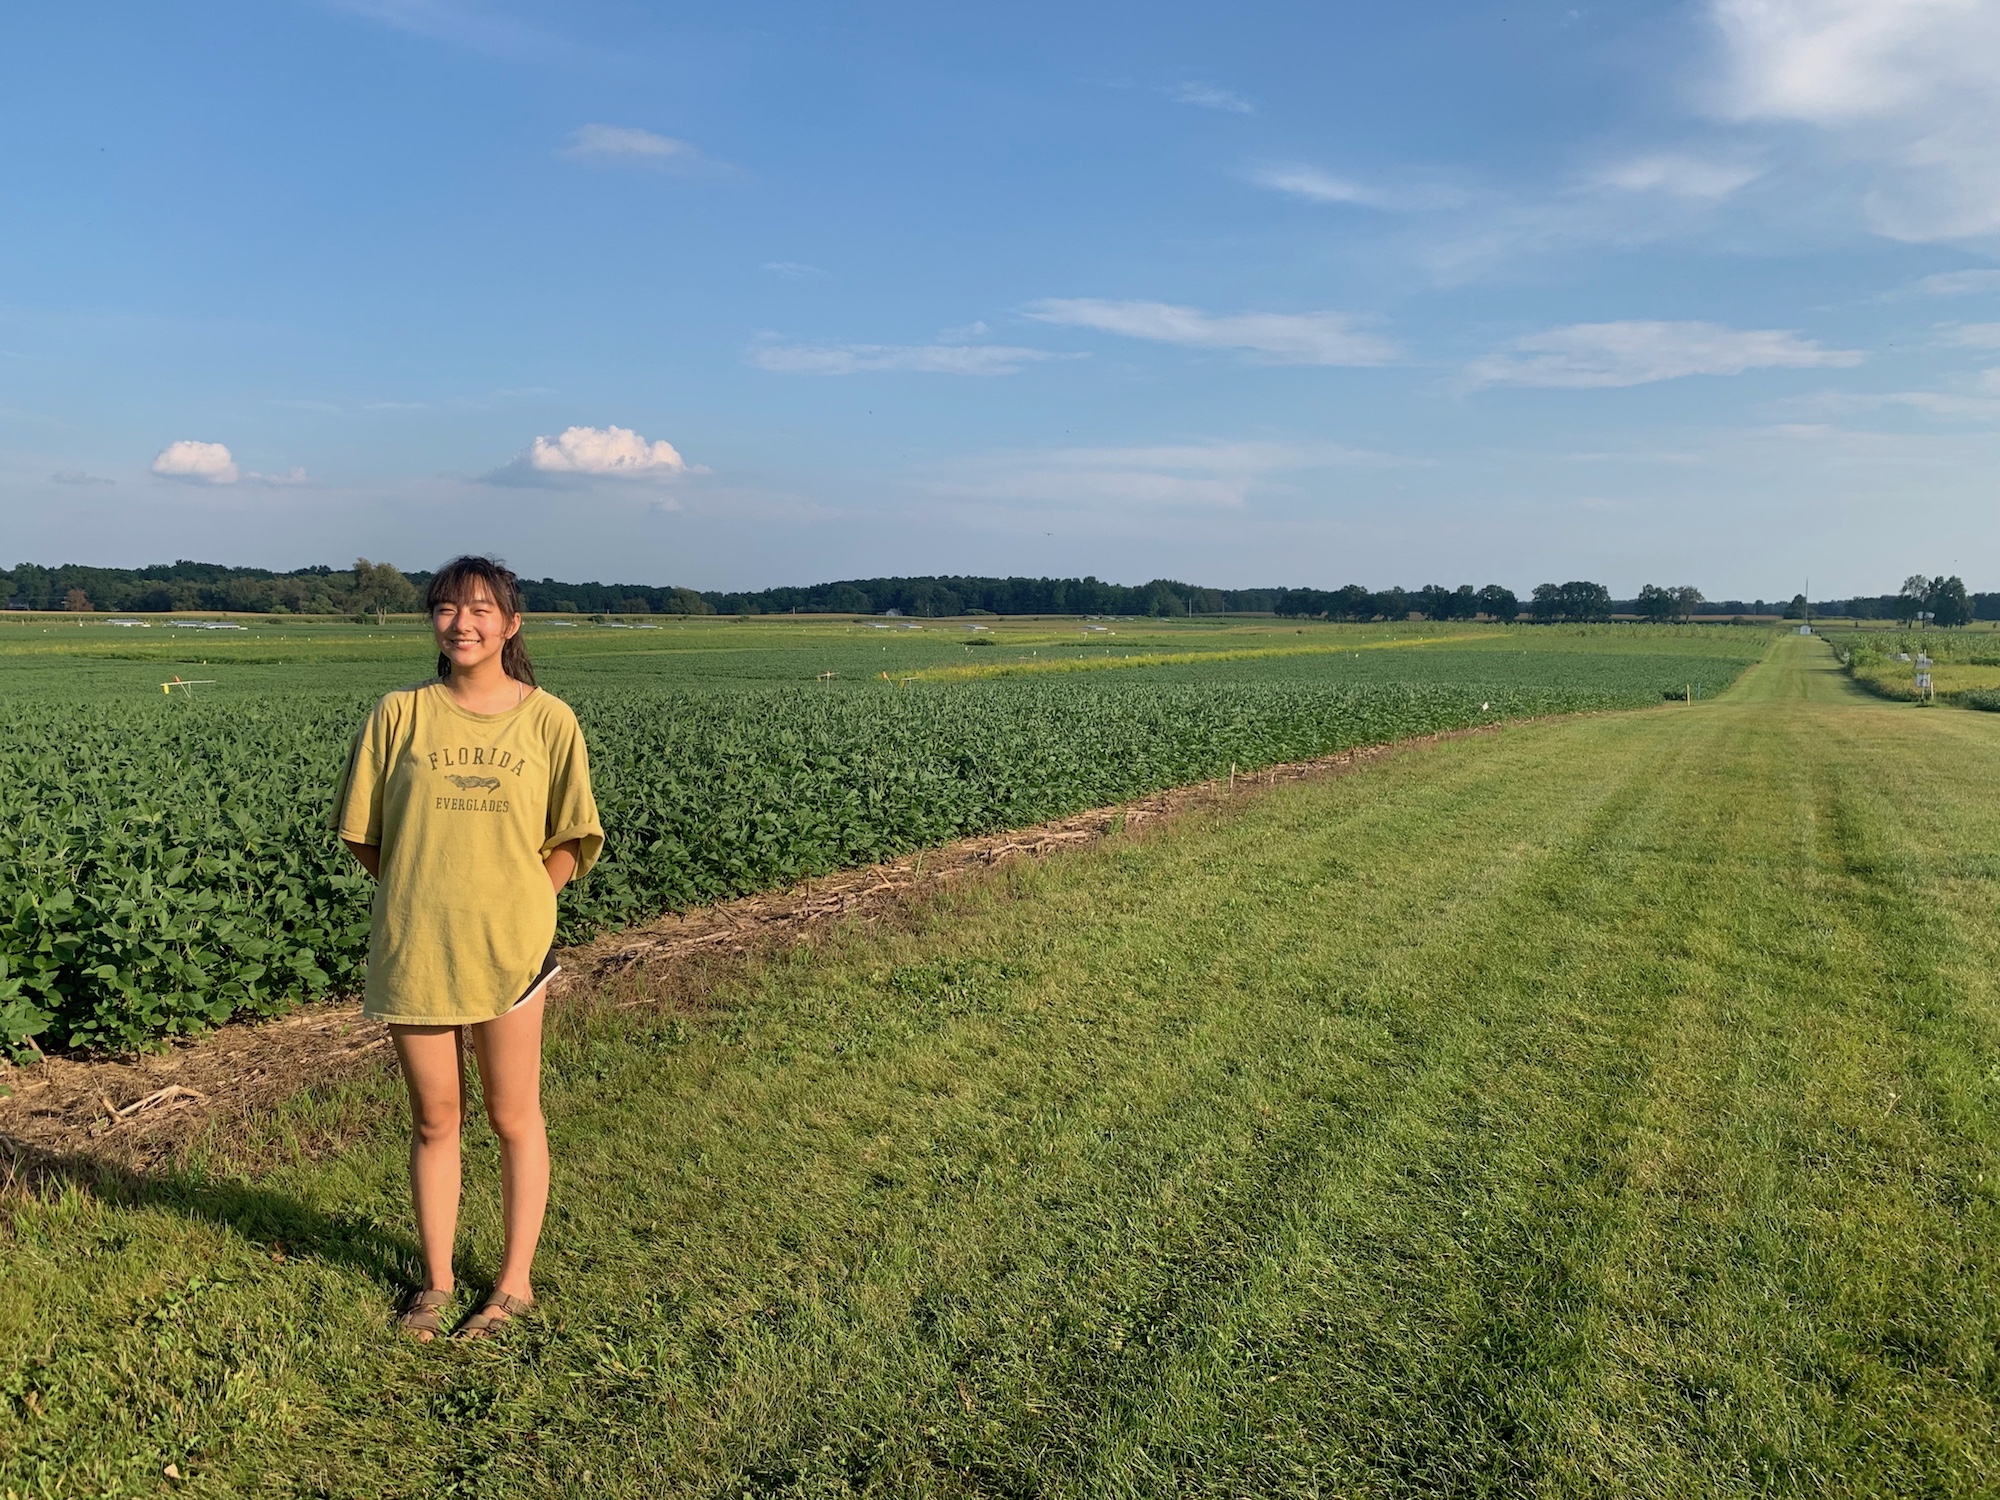 Student Linda Wu smiles next to a field of soybeans